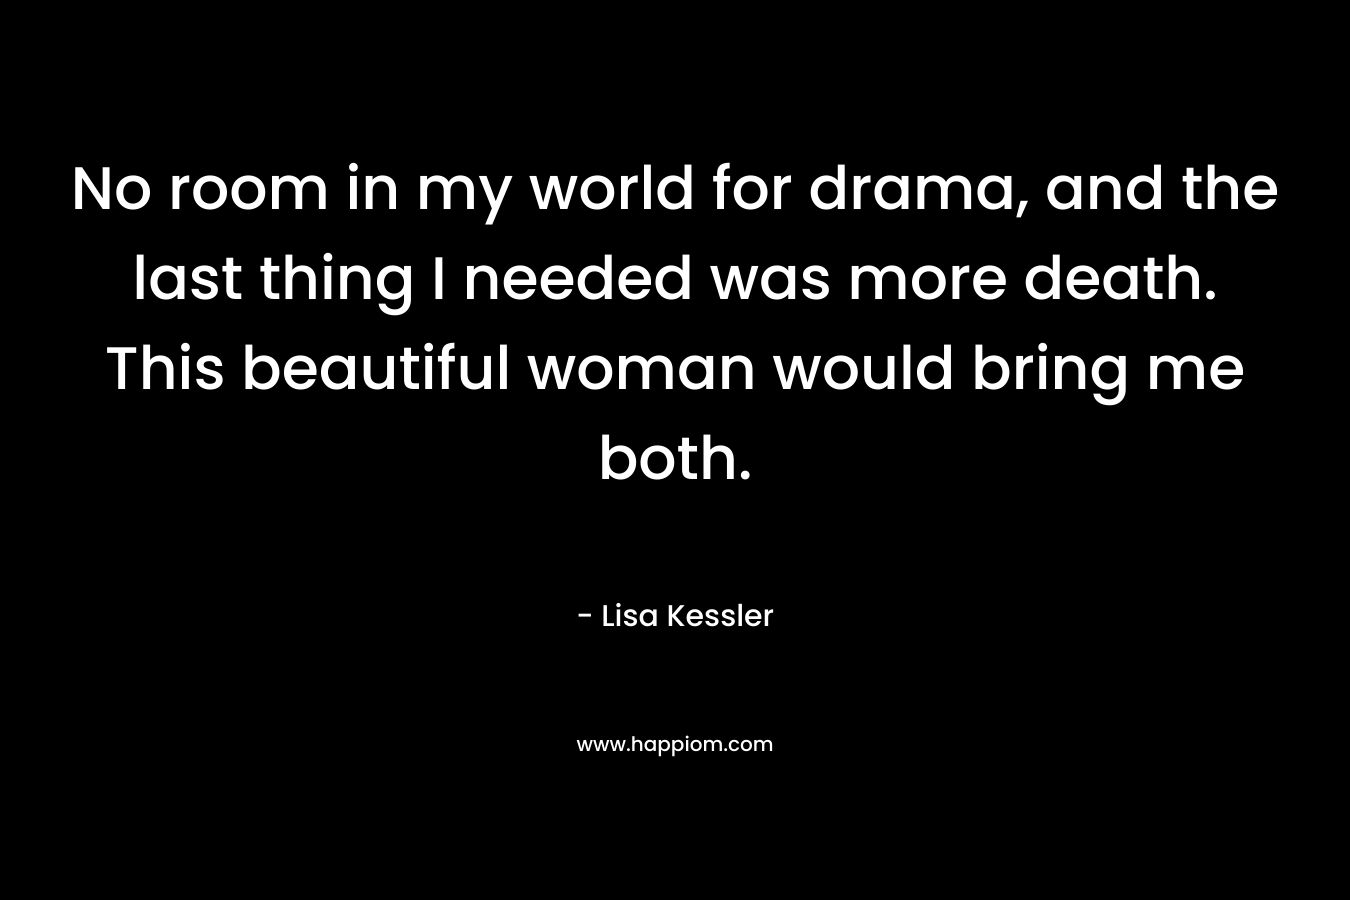 No room in my world for drama, and the last thing I needed was more death. This beautiful woman would bring me both. – Lisa Kessler